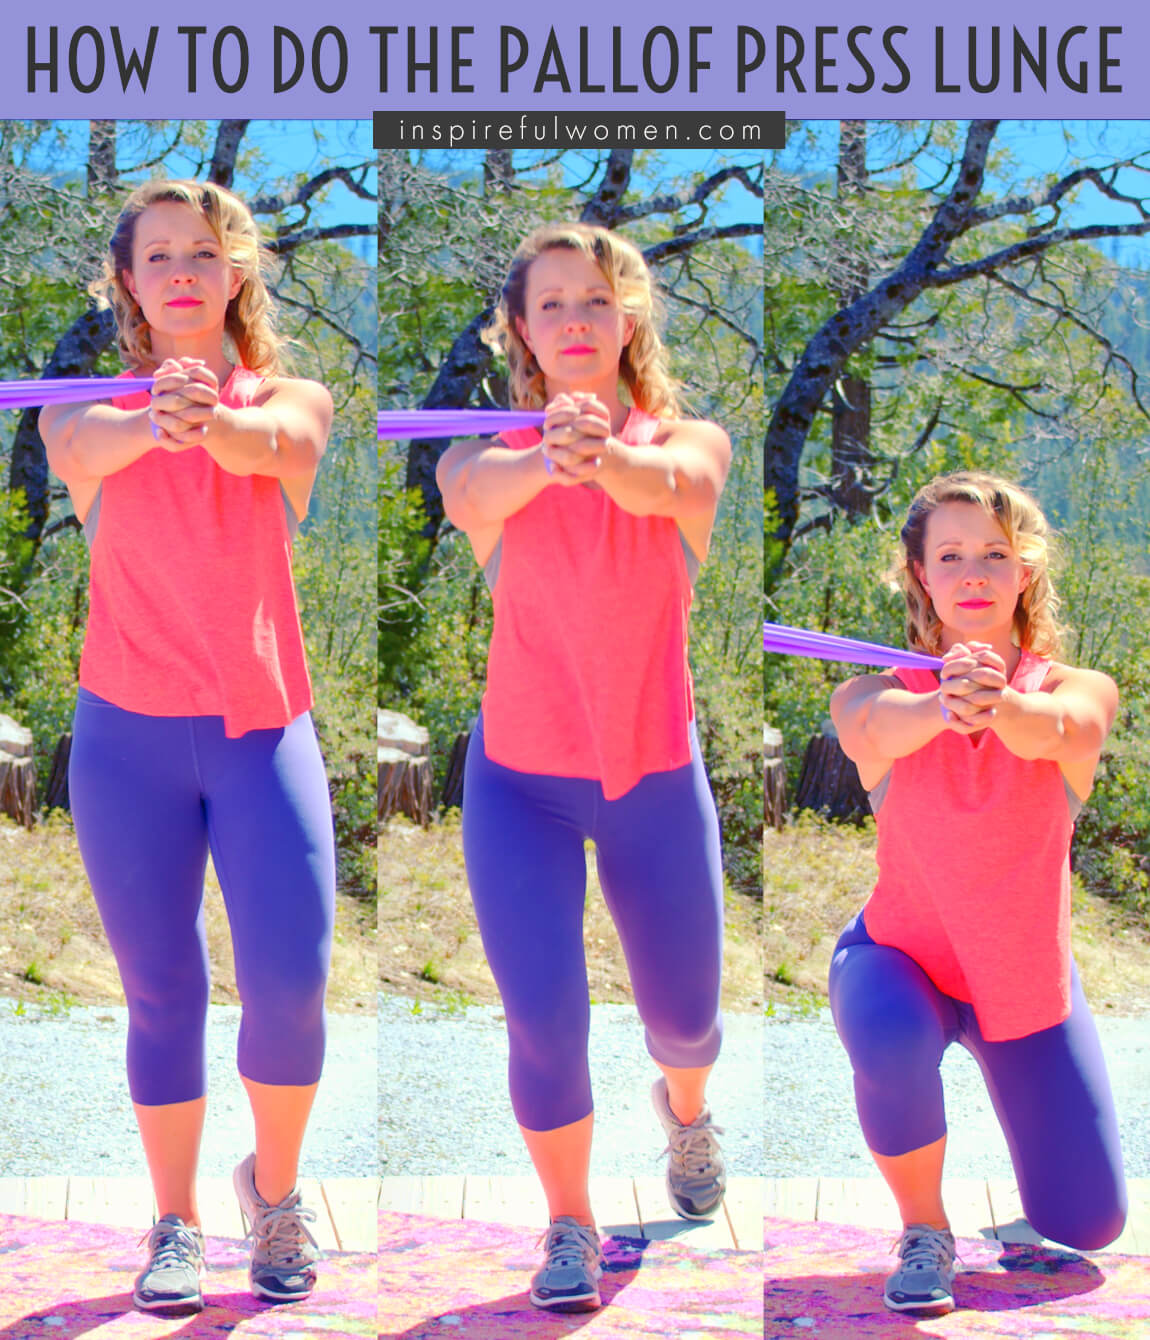 how-to-do-lunge-palloff-hold-resistance-band-core-exercise-at-home-women-40-plus